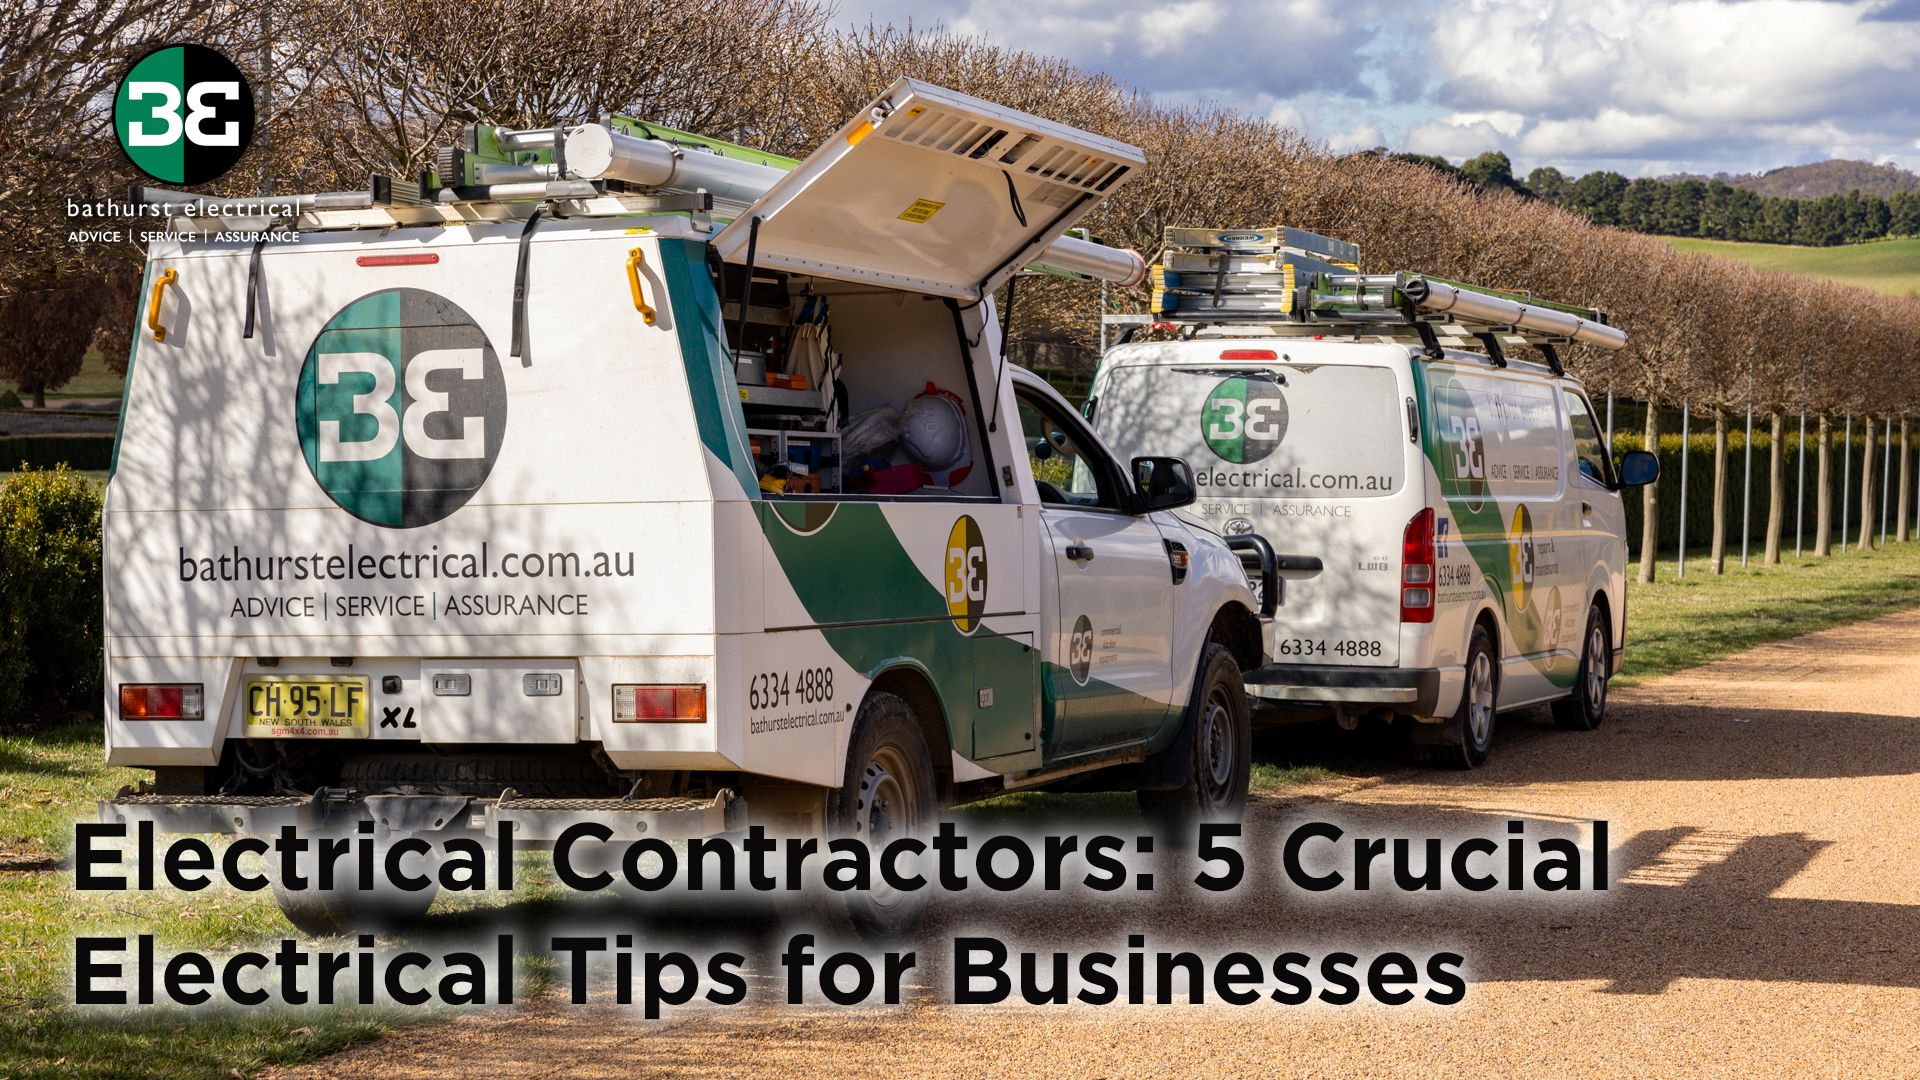 Electrical Contractors: 5 Crucial Electrical Tips for Businesses